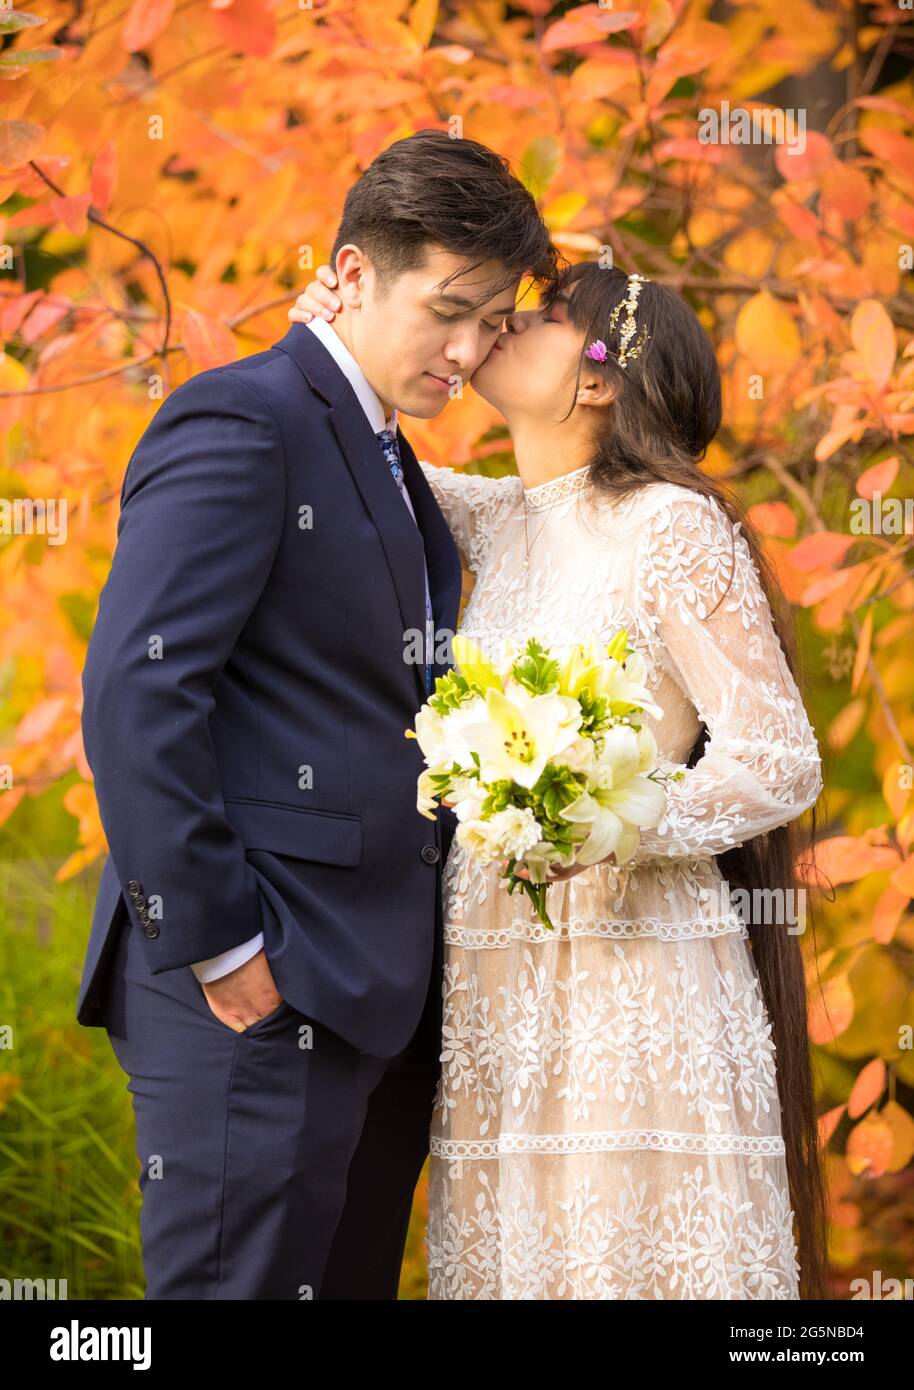 Biracial newly married couple kissing outdoors by bright orange autumn leaves Stock Photo